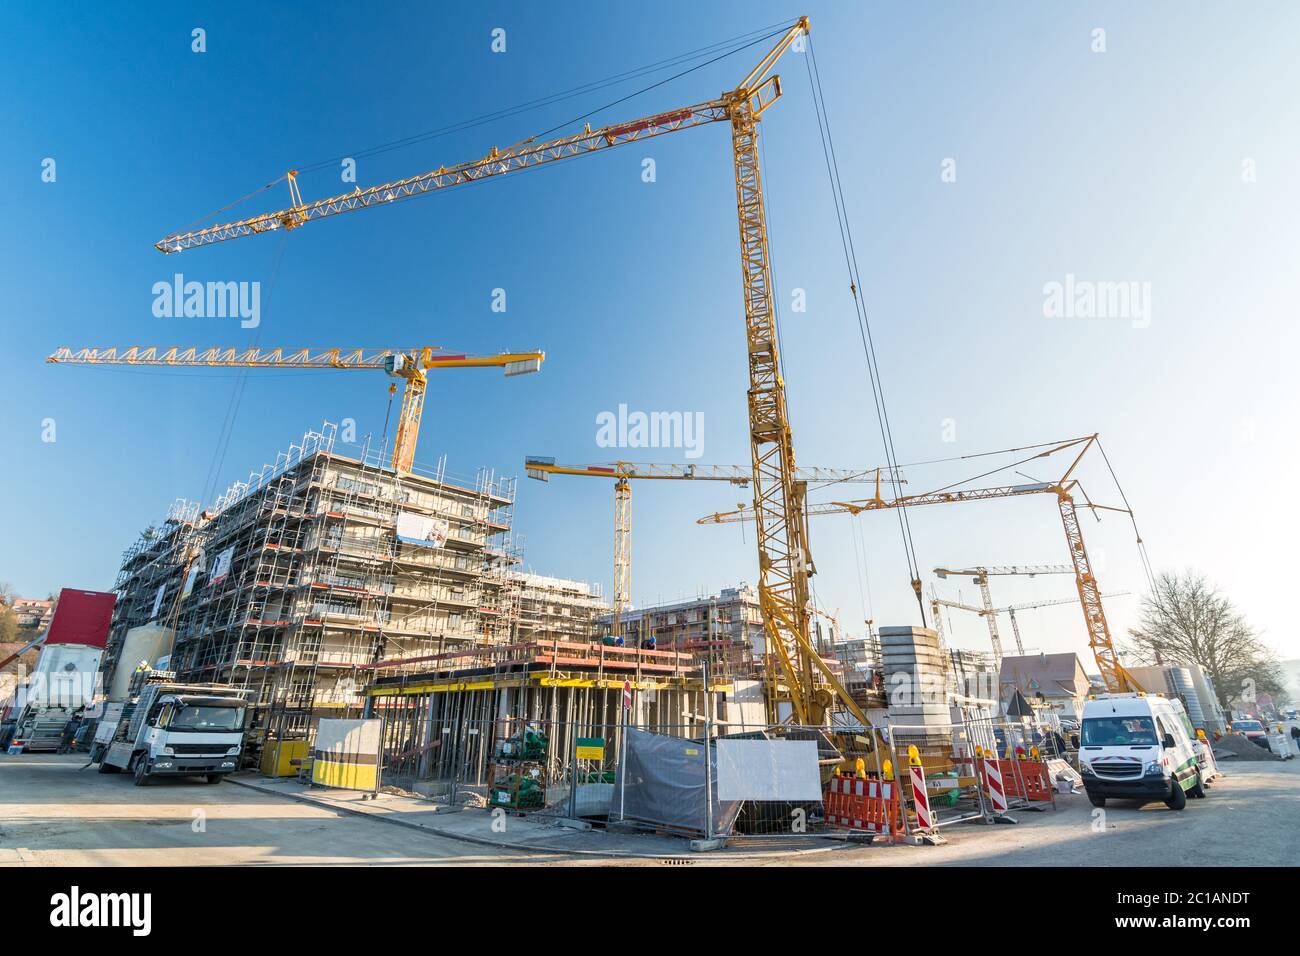 Construction site and shell construction of offices and apartment buildings with many cranes and construction vehicles Stock Photo